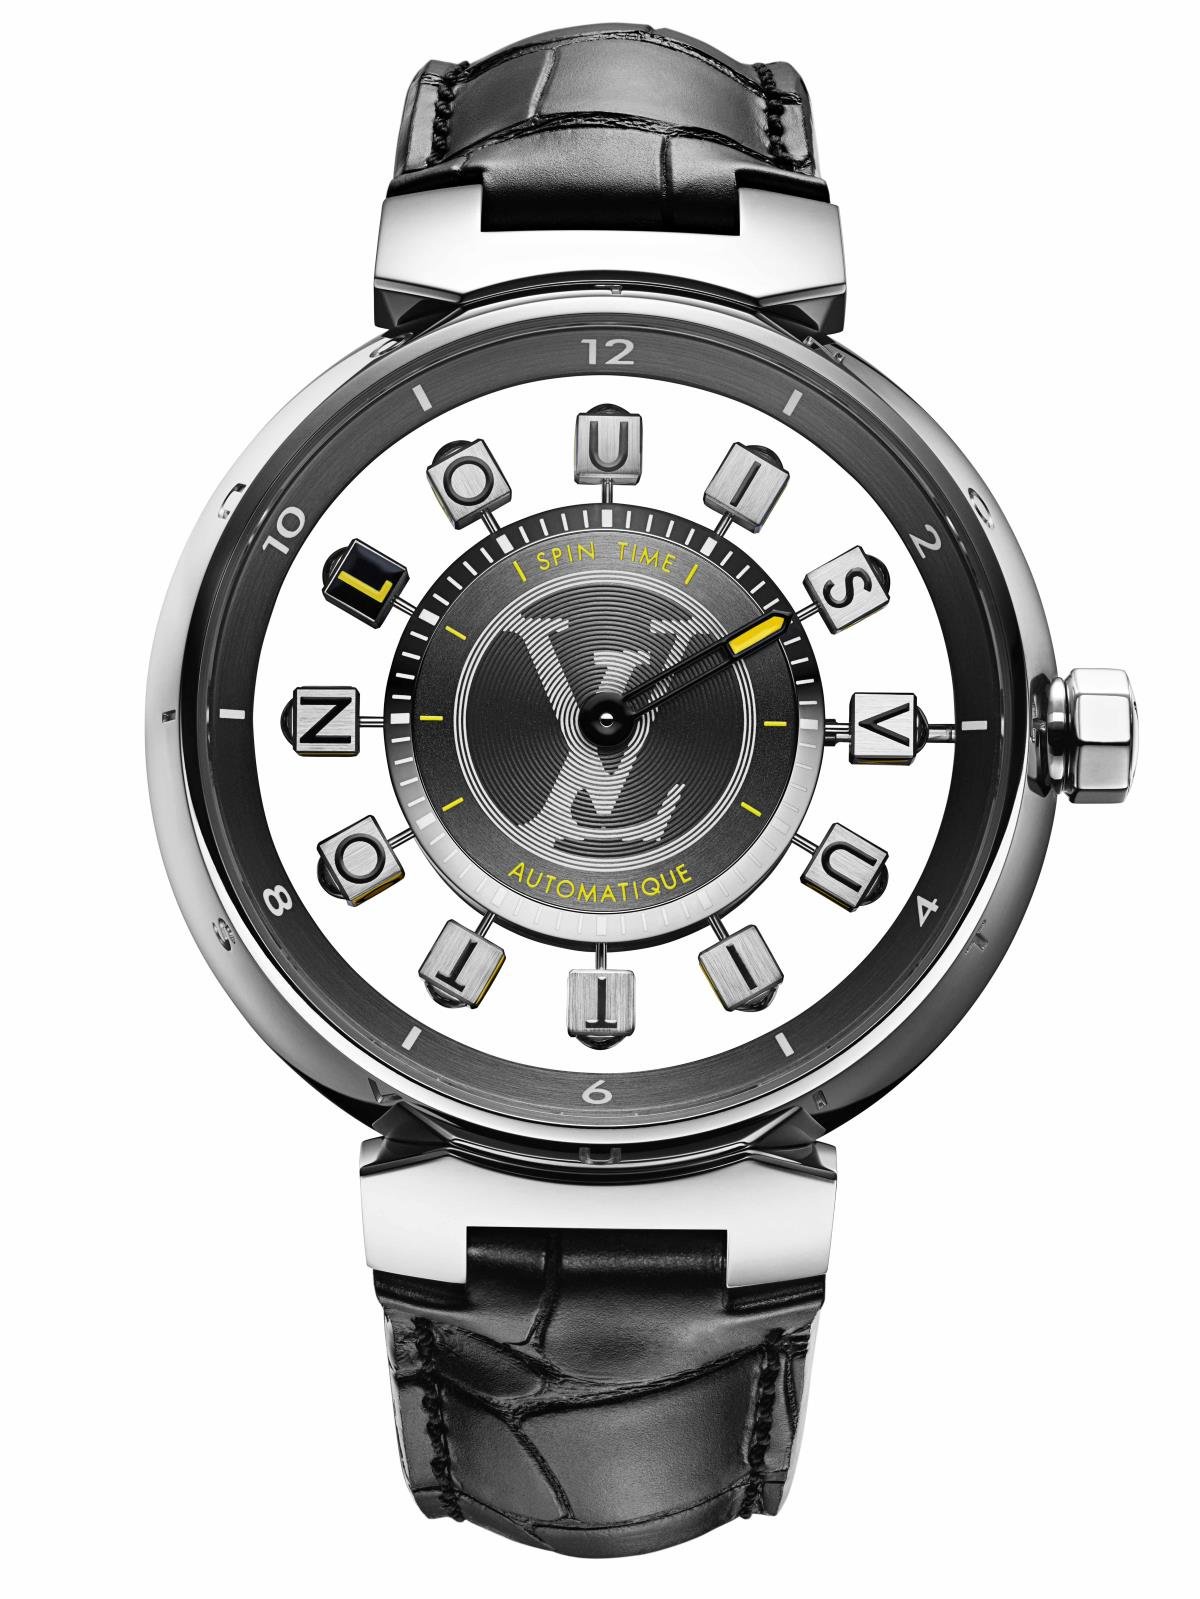 Introducing the Louis Vuitton Escale Spin Time